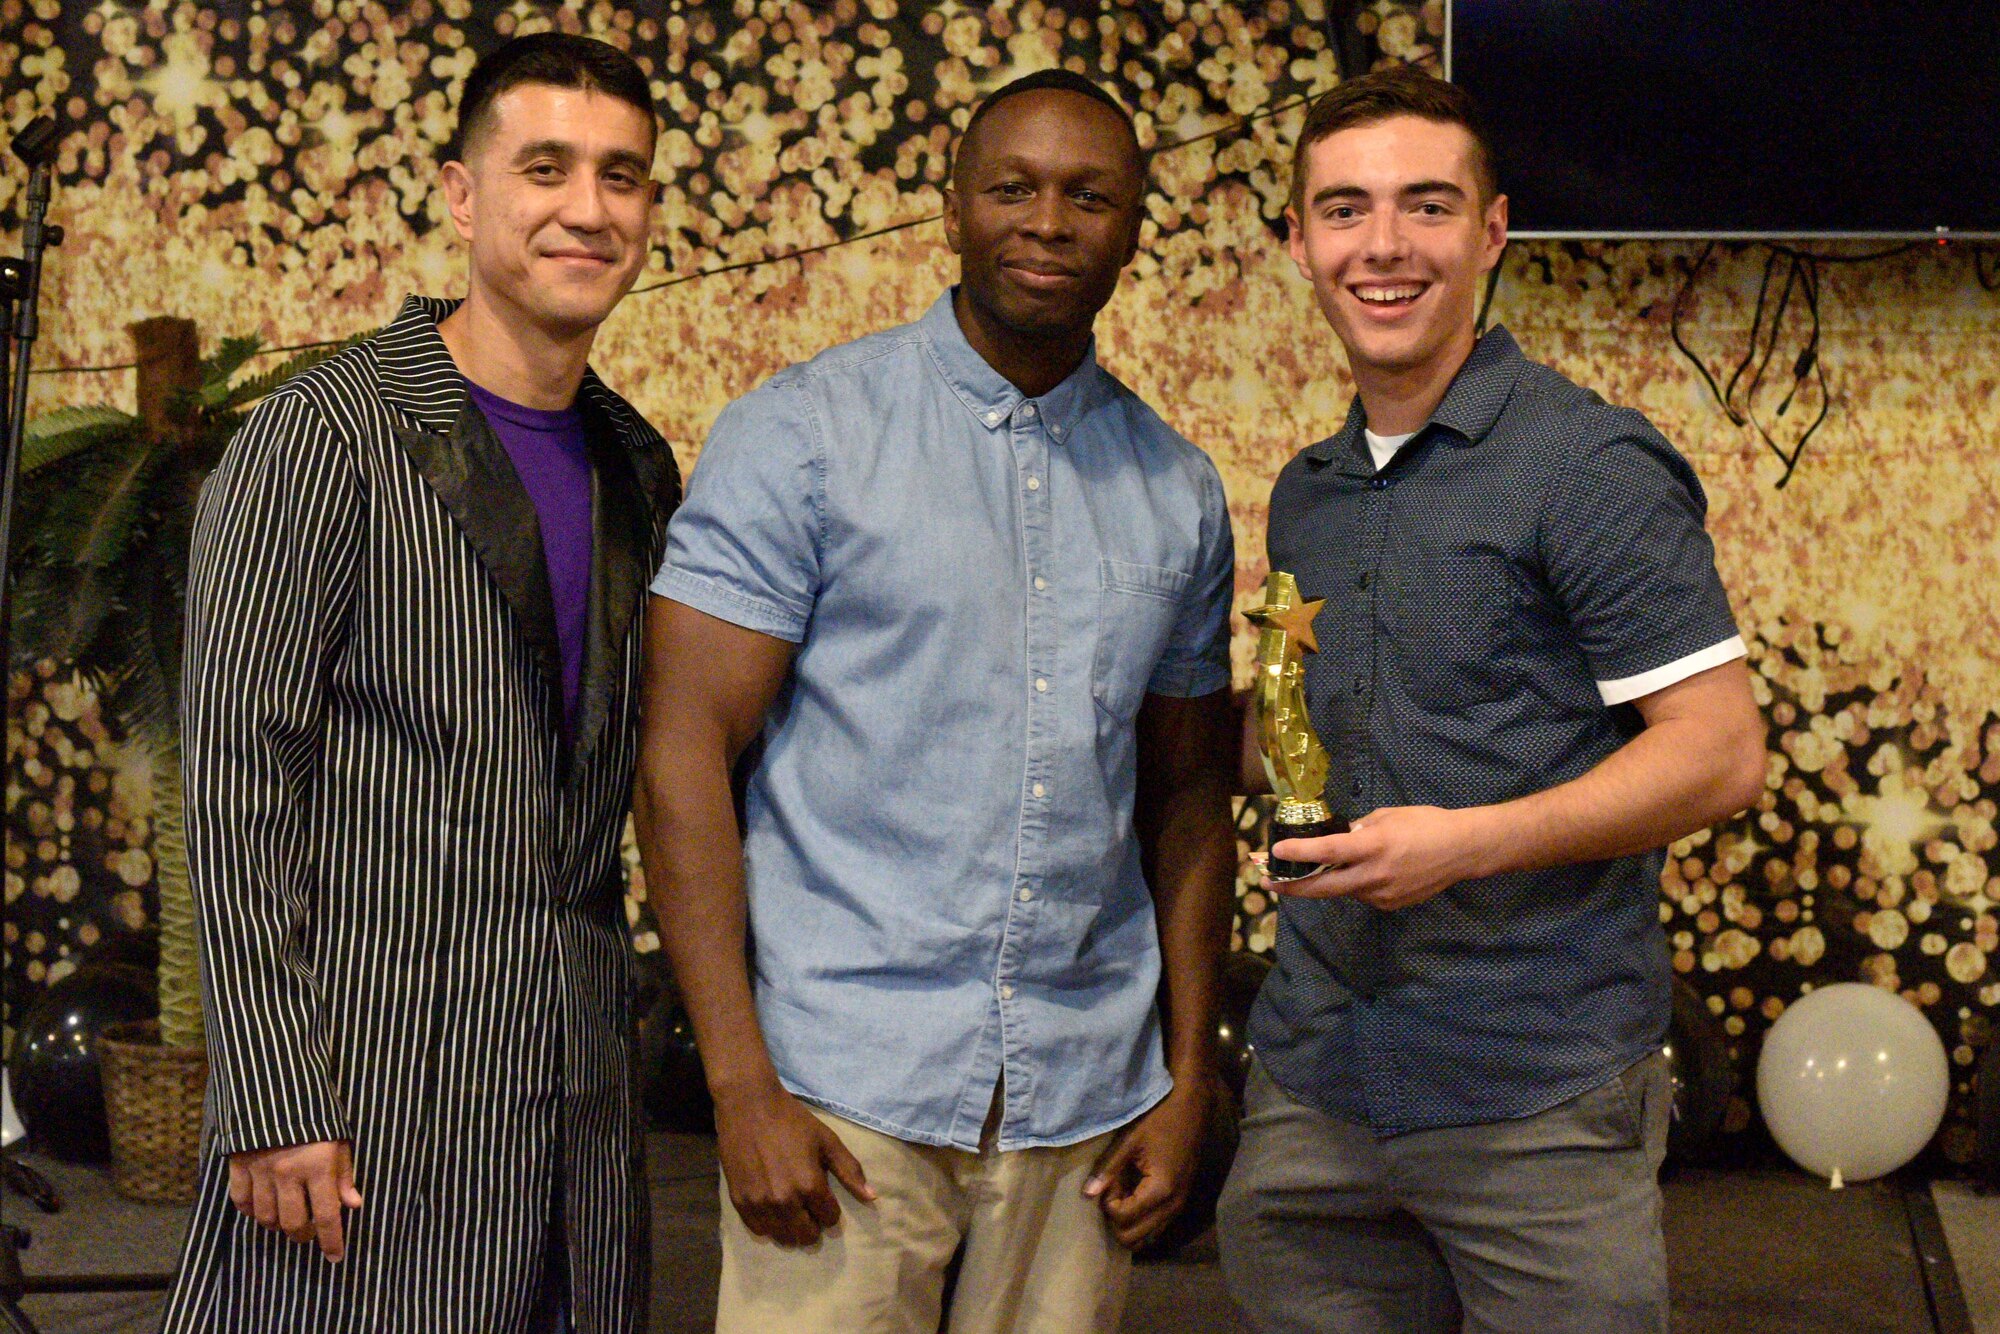 U.S. Air Force Col. Ricky Mills, 17th Training Wing commander and Chief Master Sgt. Lavor Kirkpatrick, 17th TRW command chief, present Airman 1st Class Dylan Hunter, 316th Training Squadron student, an award for the semi-annual Goodfellow’s Got Talent show at the Crossroads Student Ministry Center on Goodfellow Air Force Base, Texas, July 13, 2018. Hunter won third place for his performance. (U.S. Air Force photo by Senior Airman Randall Moose/Released)